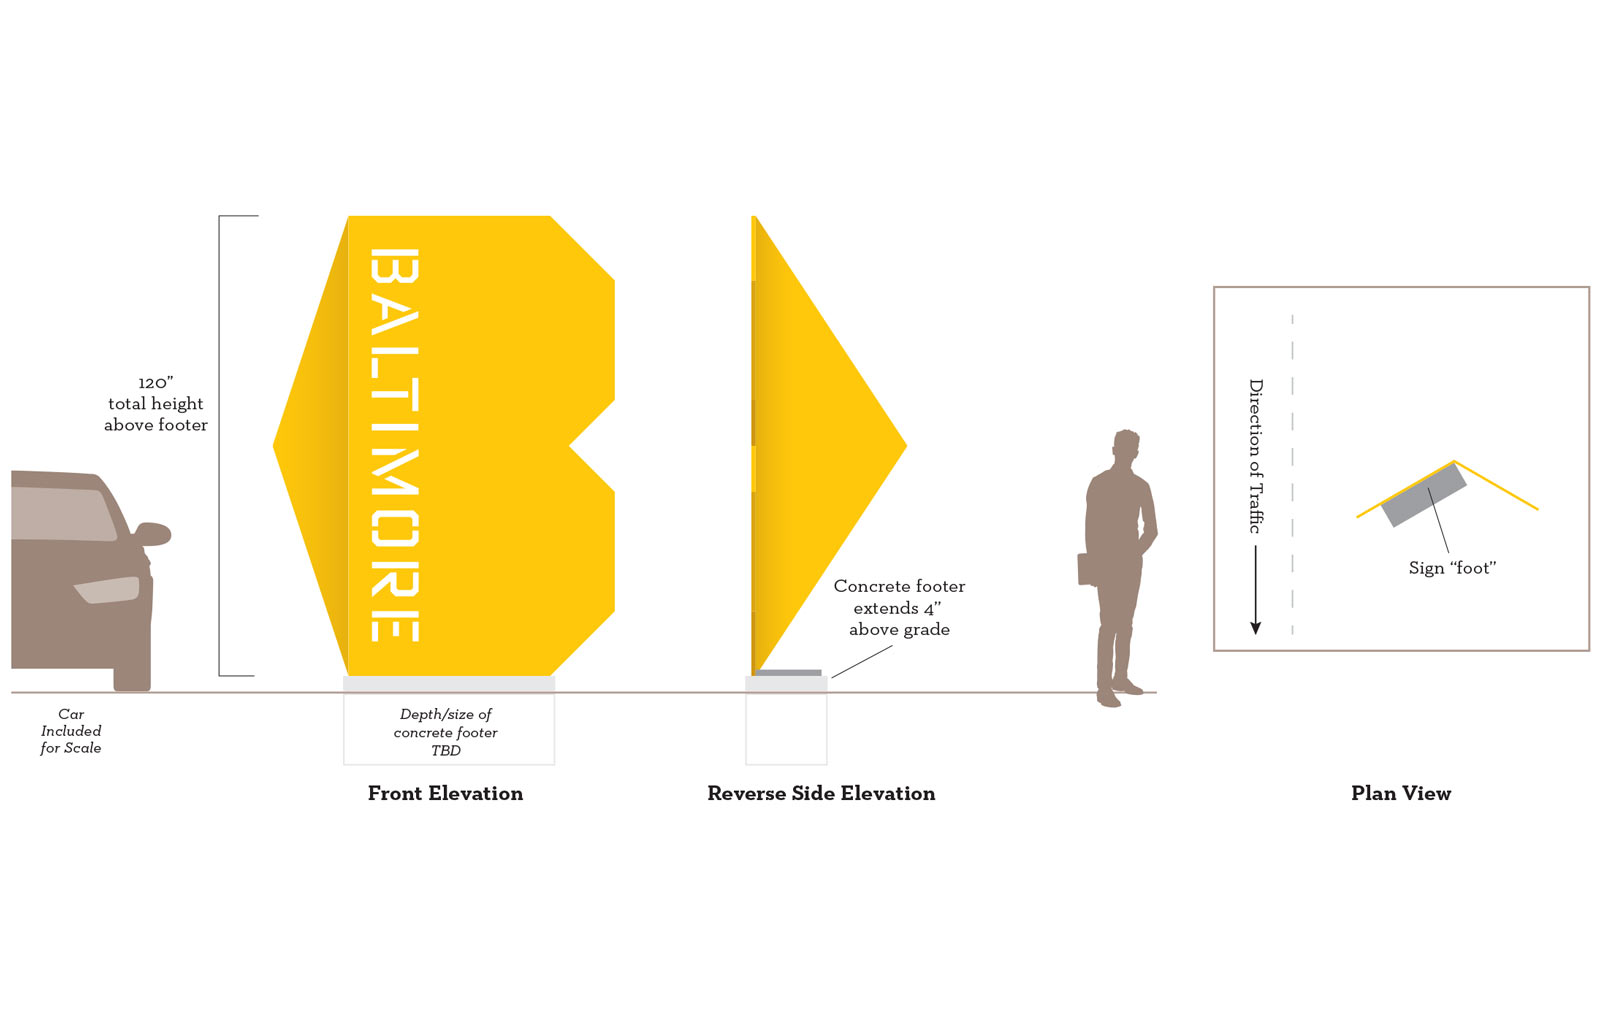 Drawings of sculptural B-shaped signage proposed as part of a new brand and suited of welcome signs for the city of Baltimore